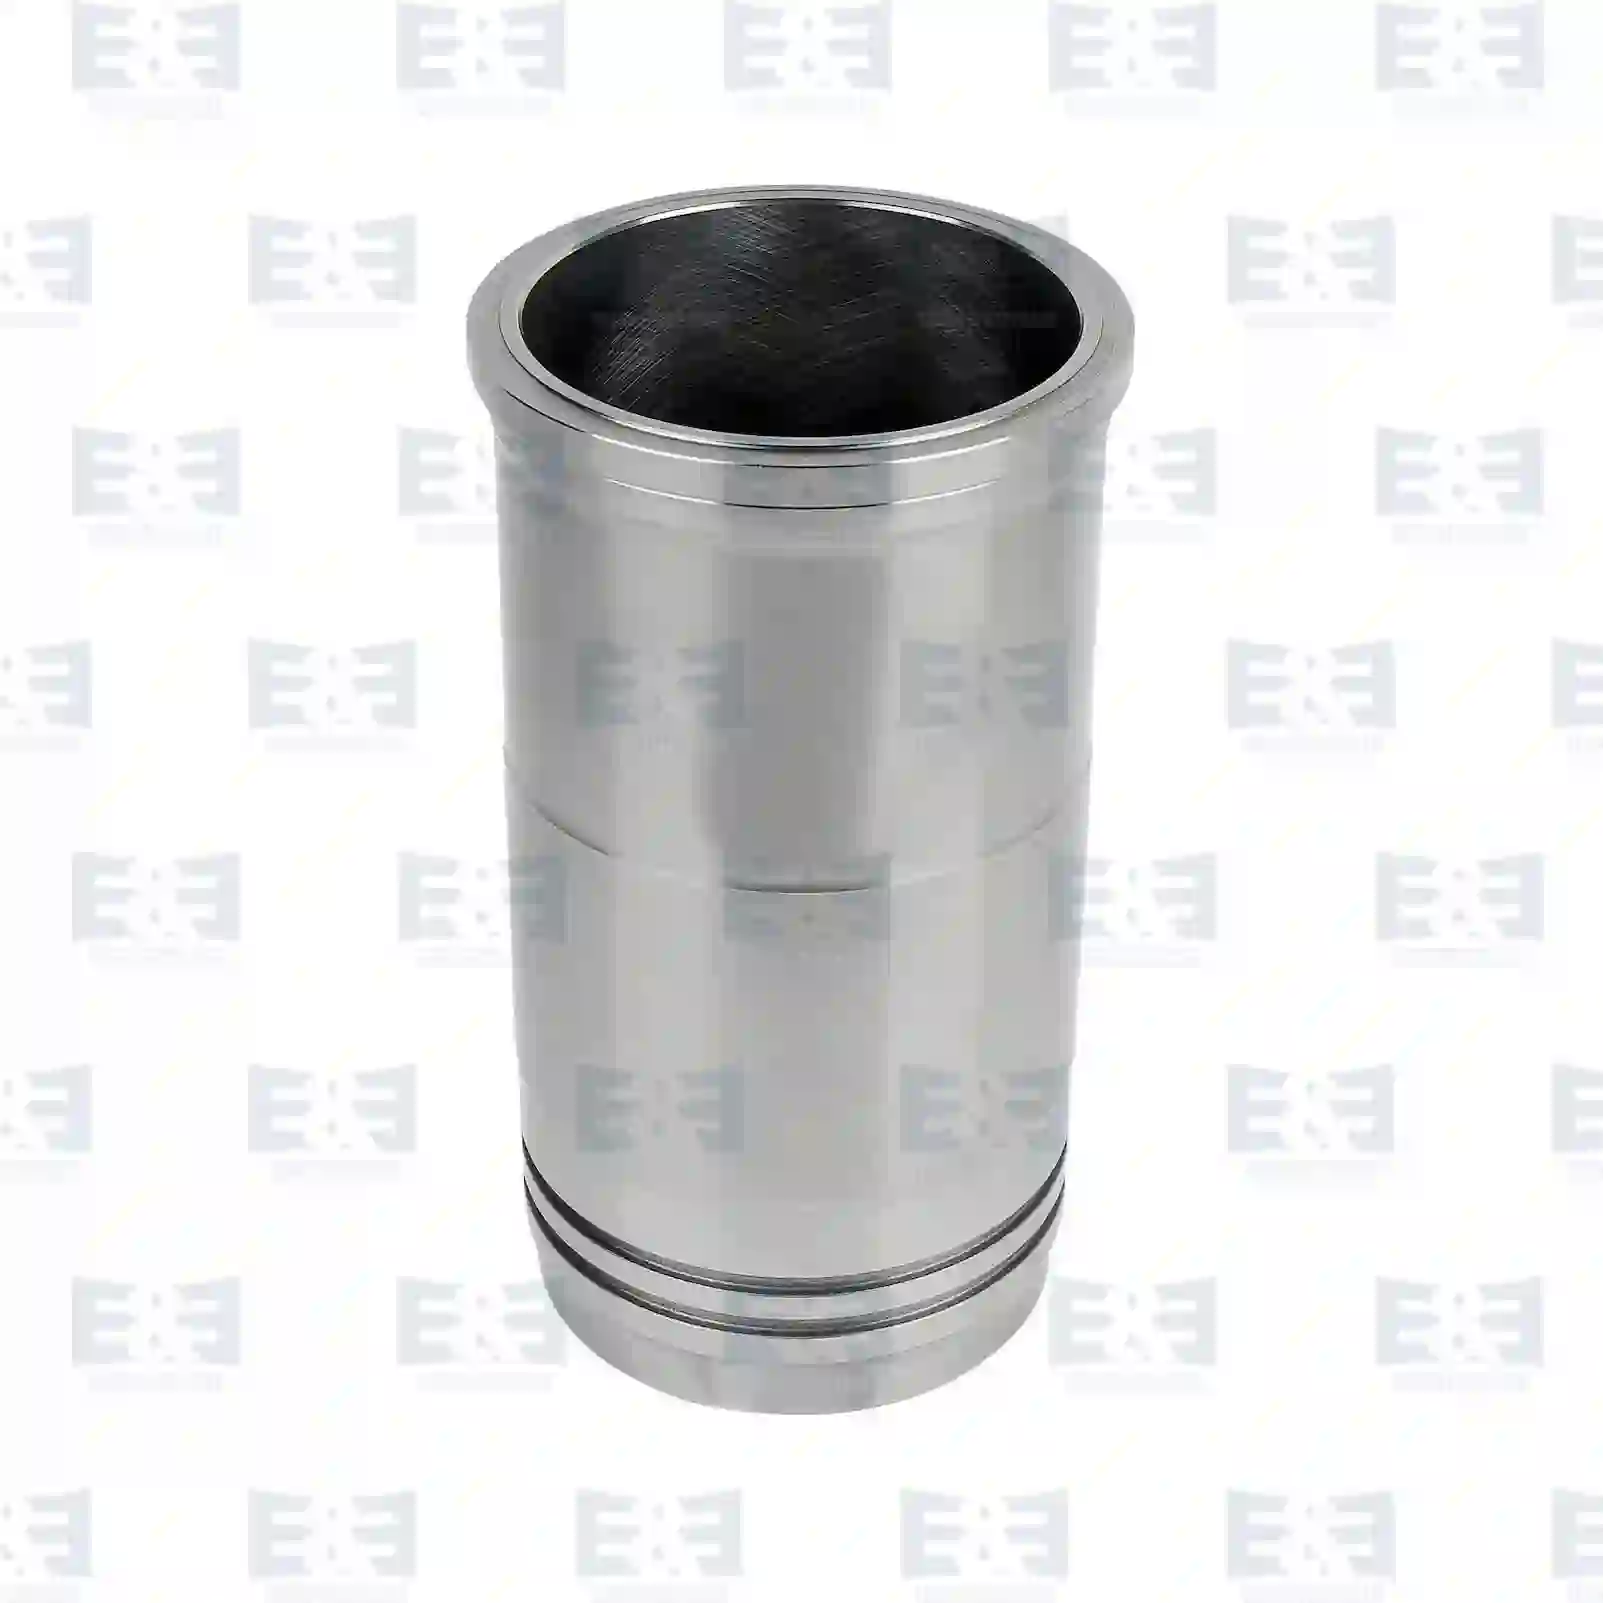 Cylinder liner, without seal rings, 2E2208387, 5001856169, , , ||  2E2208387 E&E Truck Spare Parts | Truck Spare Parts, Auotomotive Spare Parts Cylinder liner, without seal rings, 2E2208387, 5001856169, , , ||  2E2208387 E&E Truck Spare Parts | Truck Spare Parts, Auotomotive Spare Parts